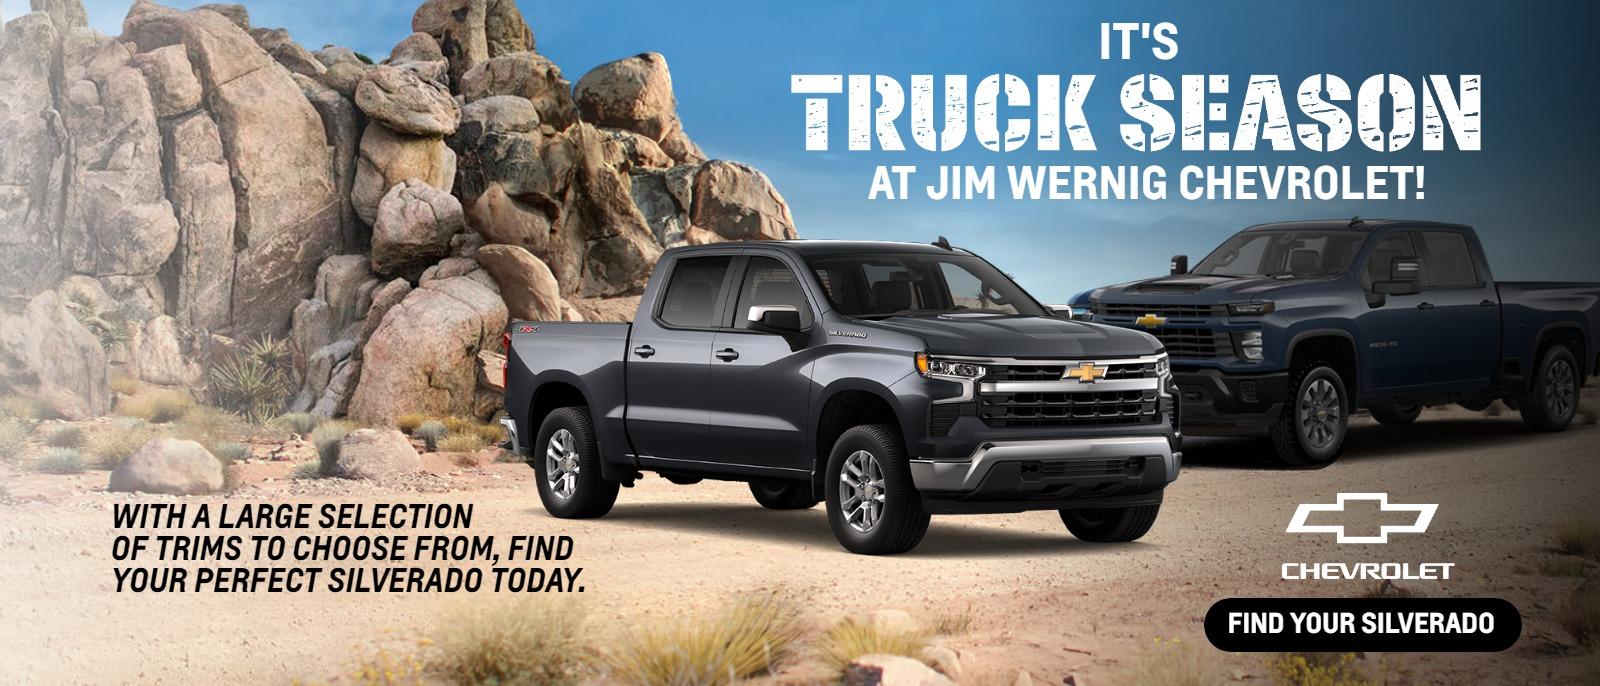 It's Truck Season at Jim Wernig Chevrolet!
With a large selection of trims to choose from, find your perfect Silverado today.
Find Your Silverado